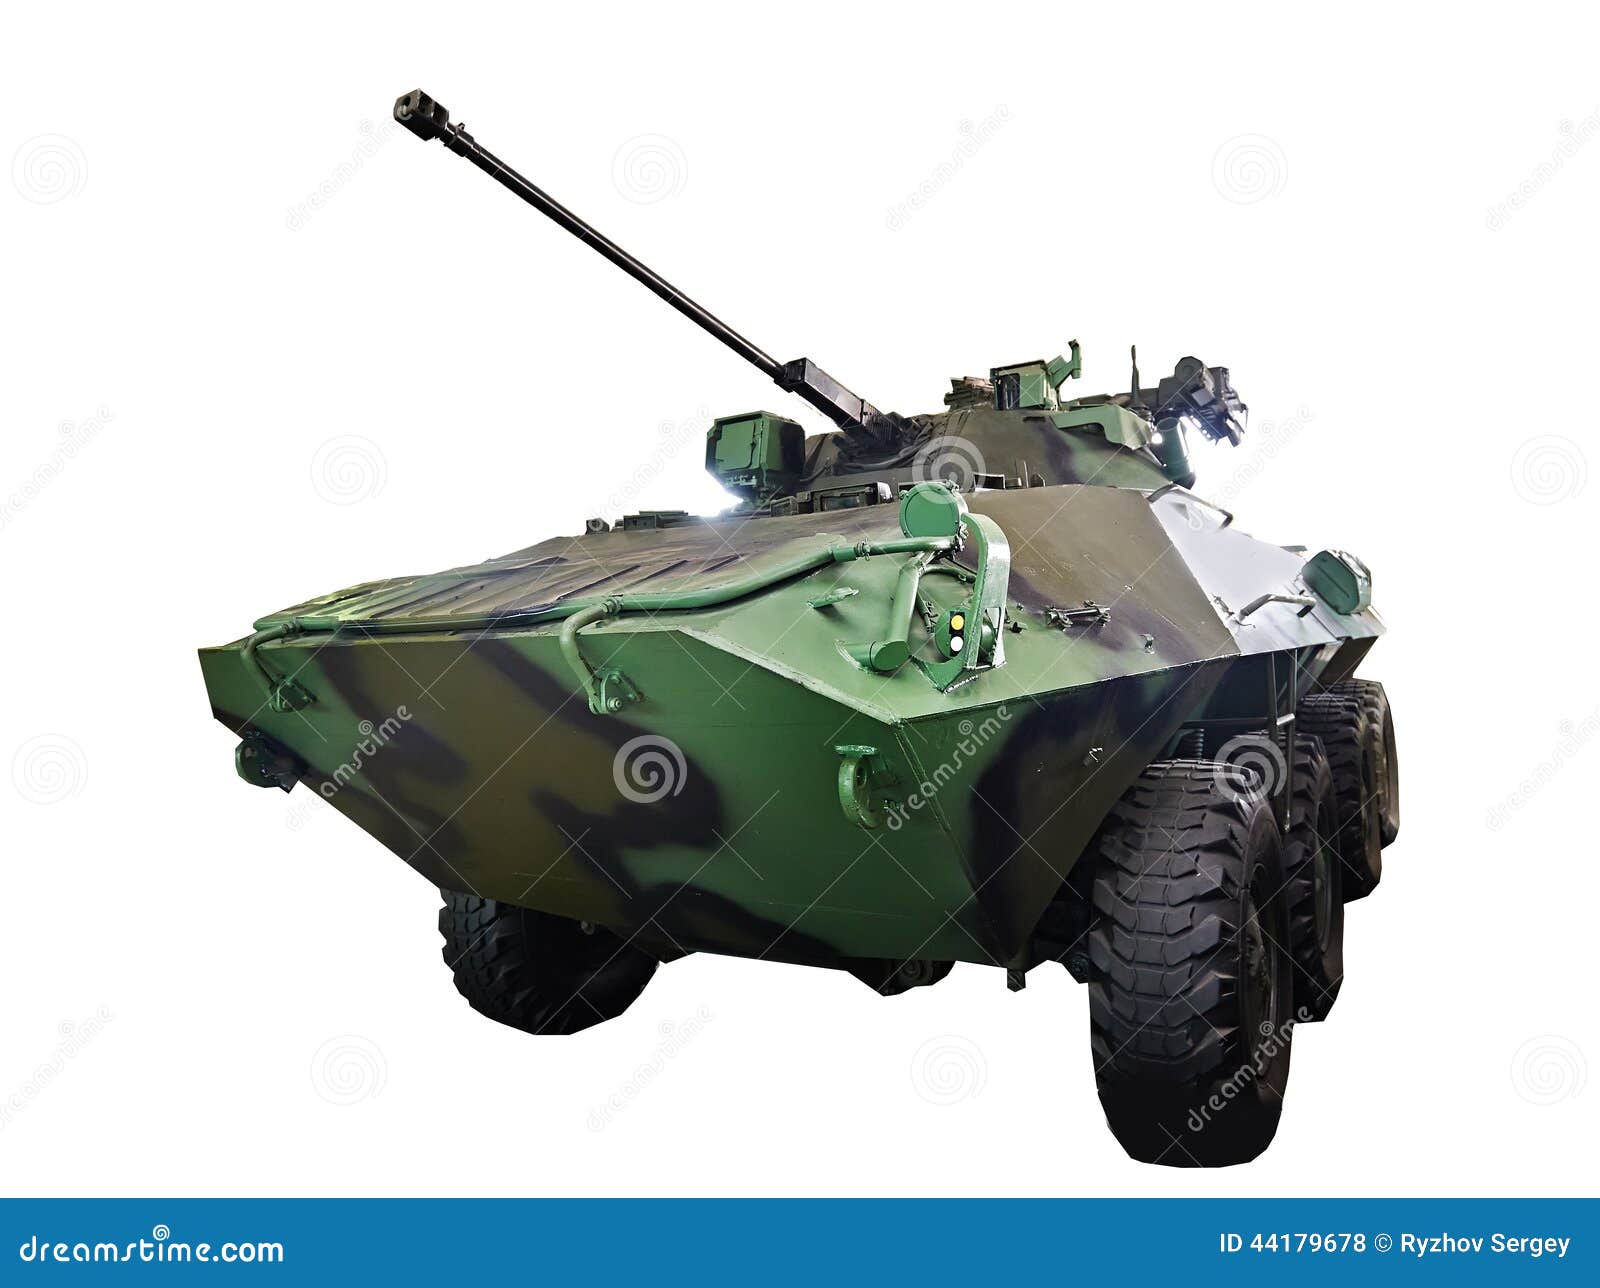 armored personnel carrier btr-90